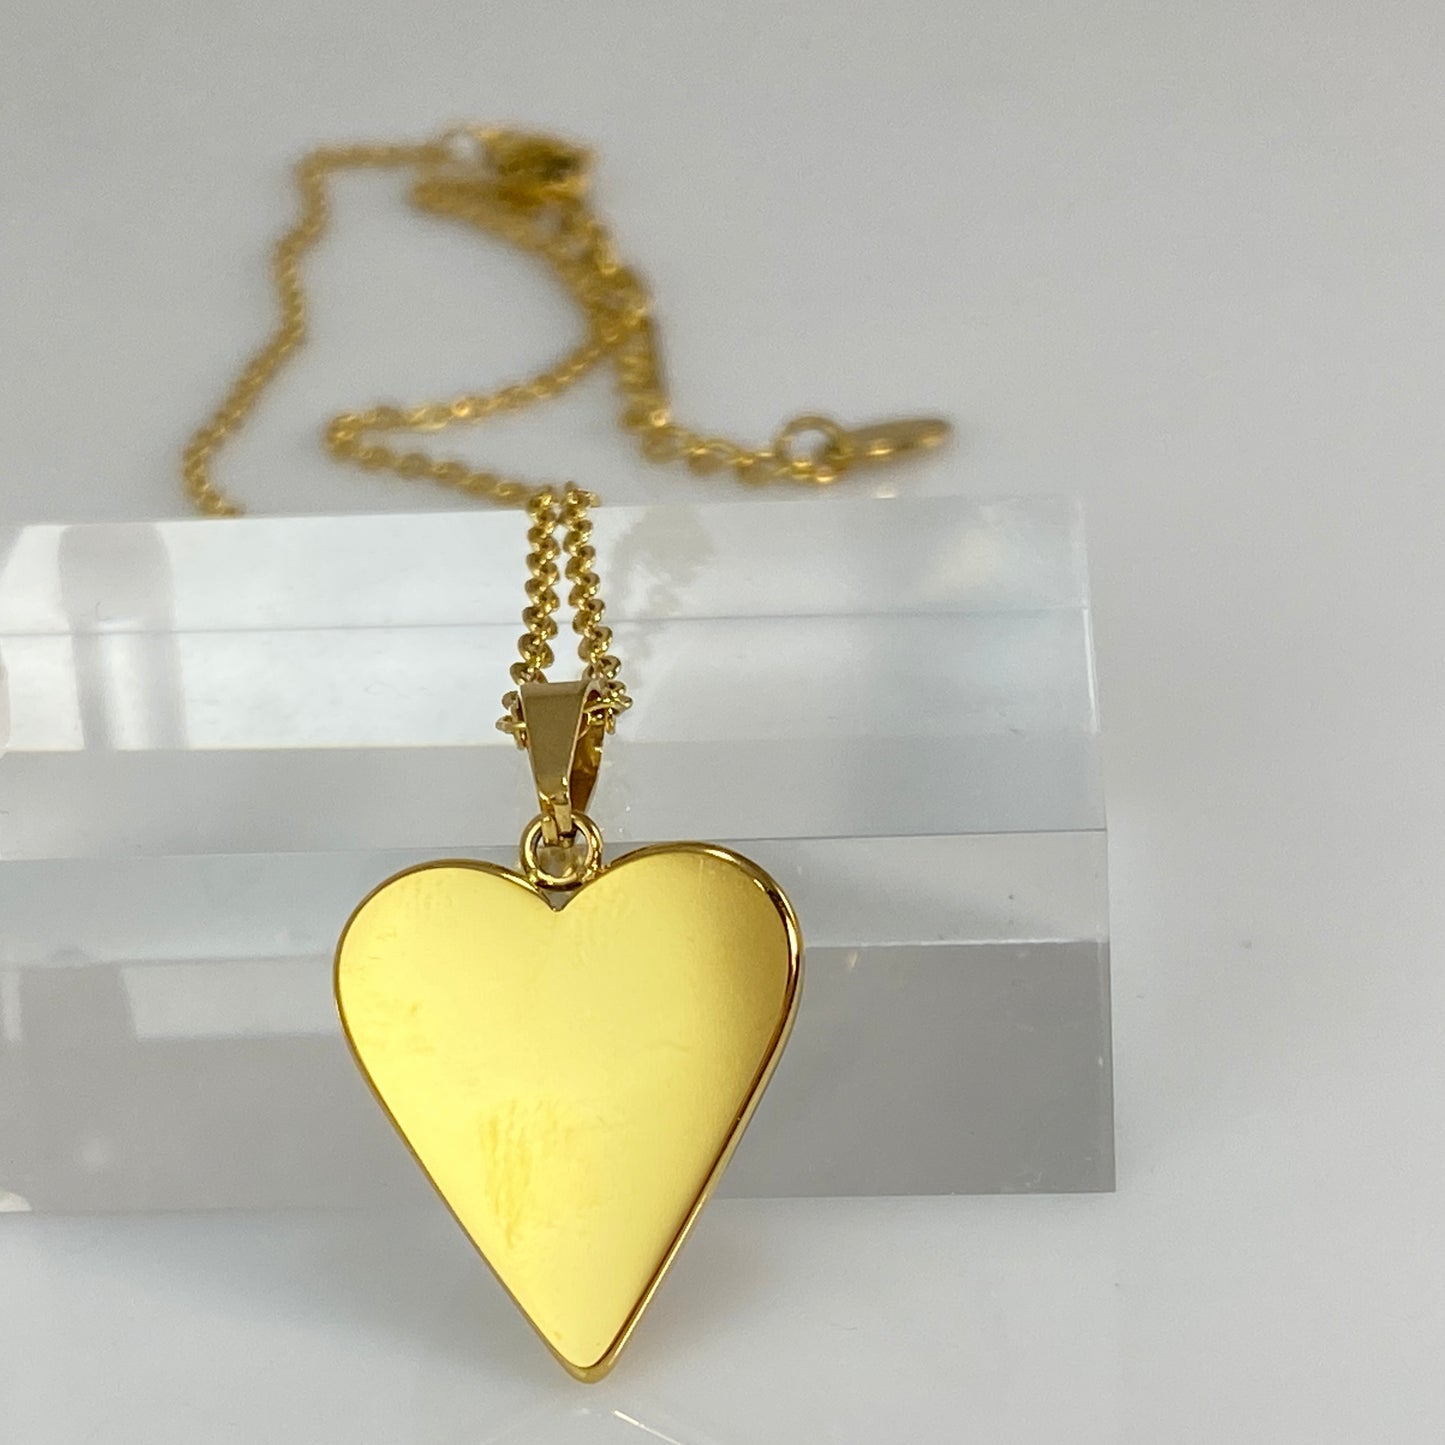 18 kt Gold Plated Black Heart Pendant on Stainless Steel Cable Chain Link Necklace